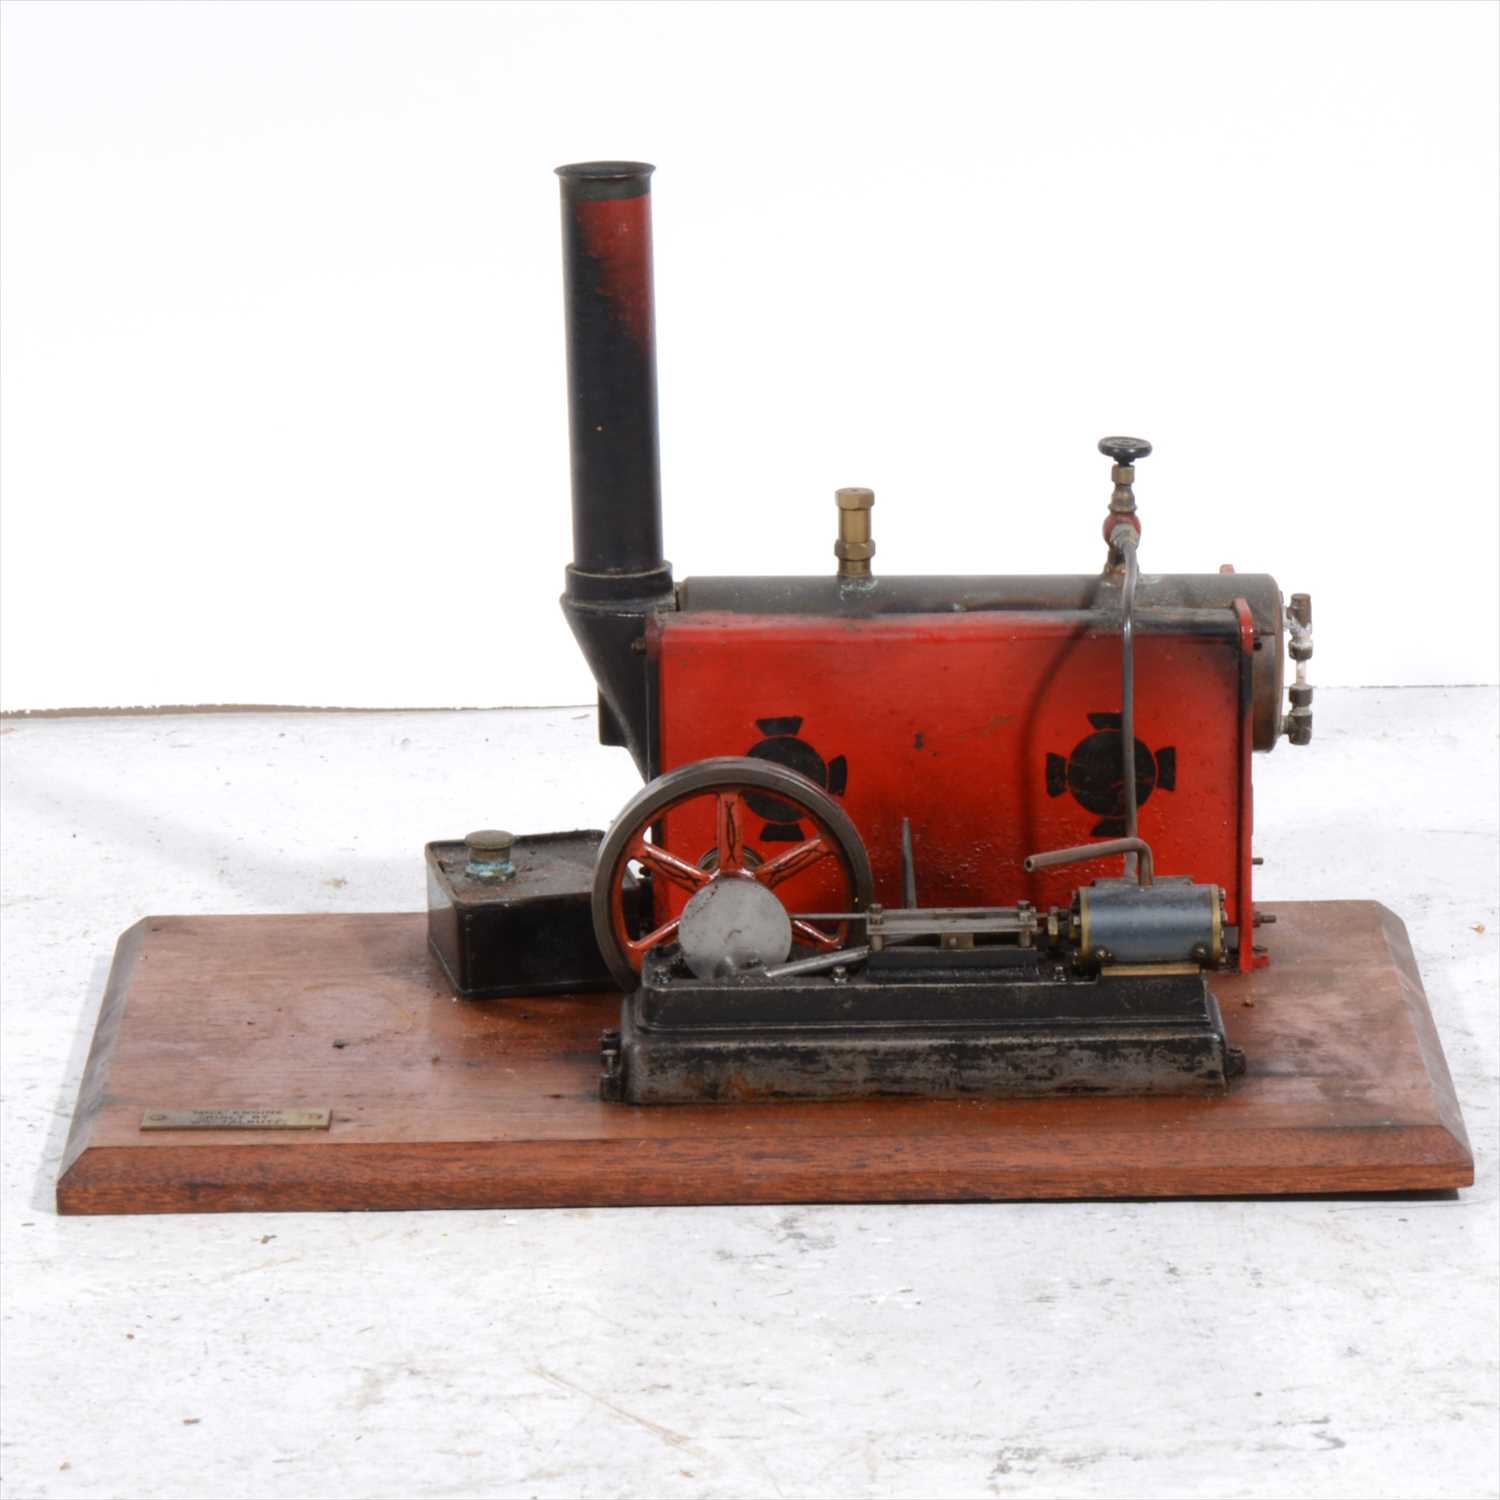 Lot 1 - A Stuart Turner S50 horizontal live steam mill engine and steam boiler.